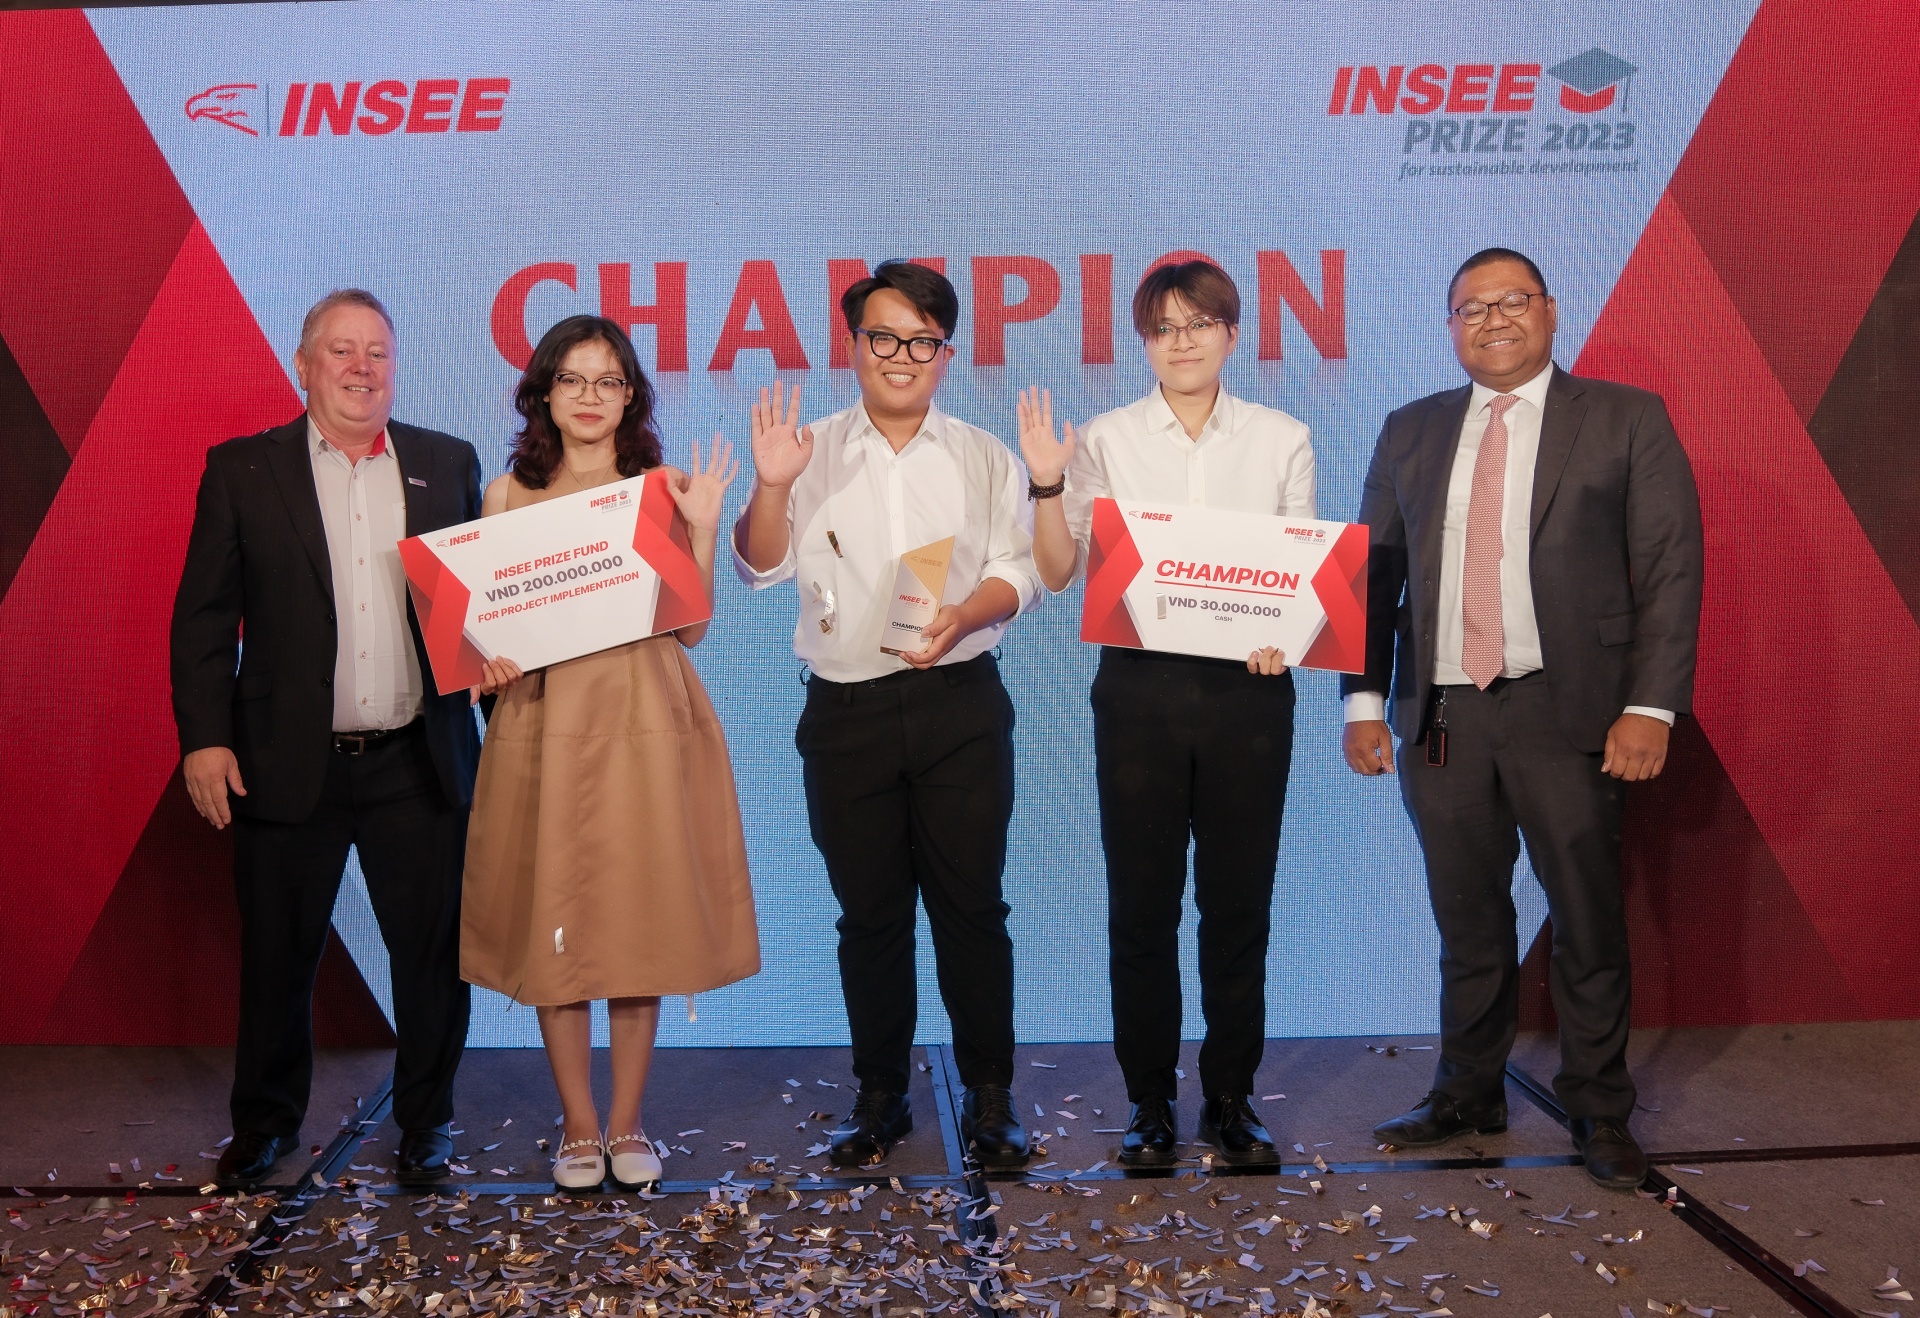 INSEE prize announces 2023 champion